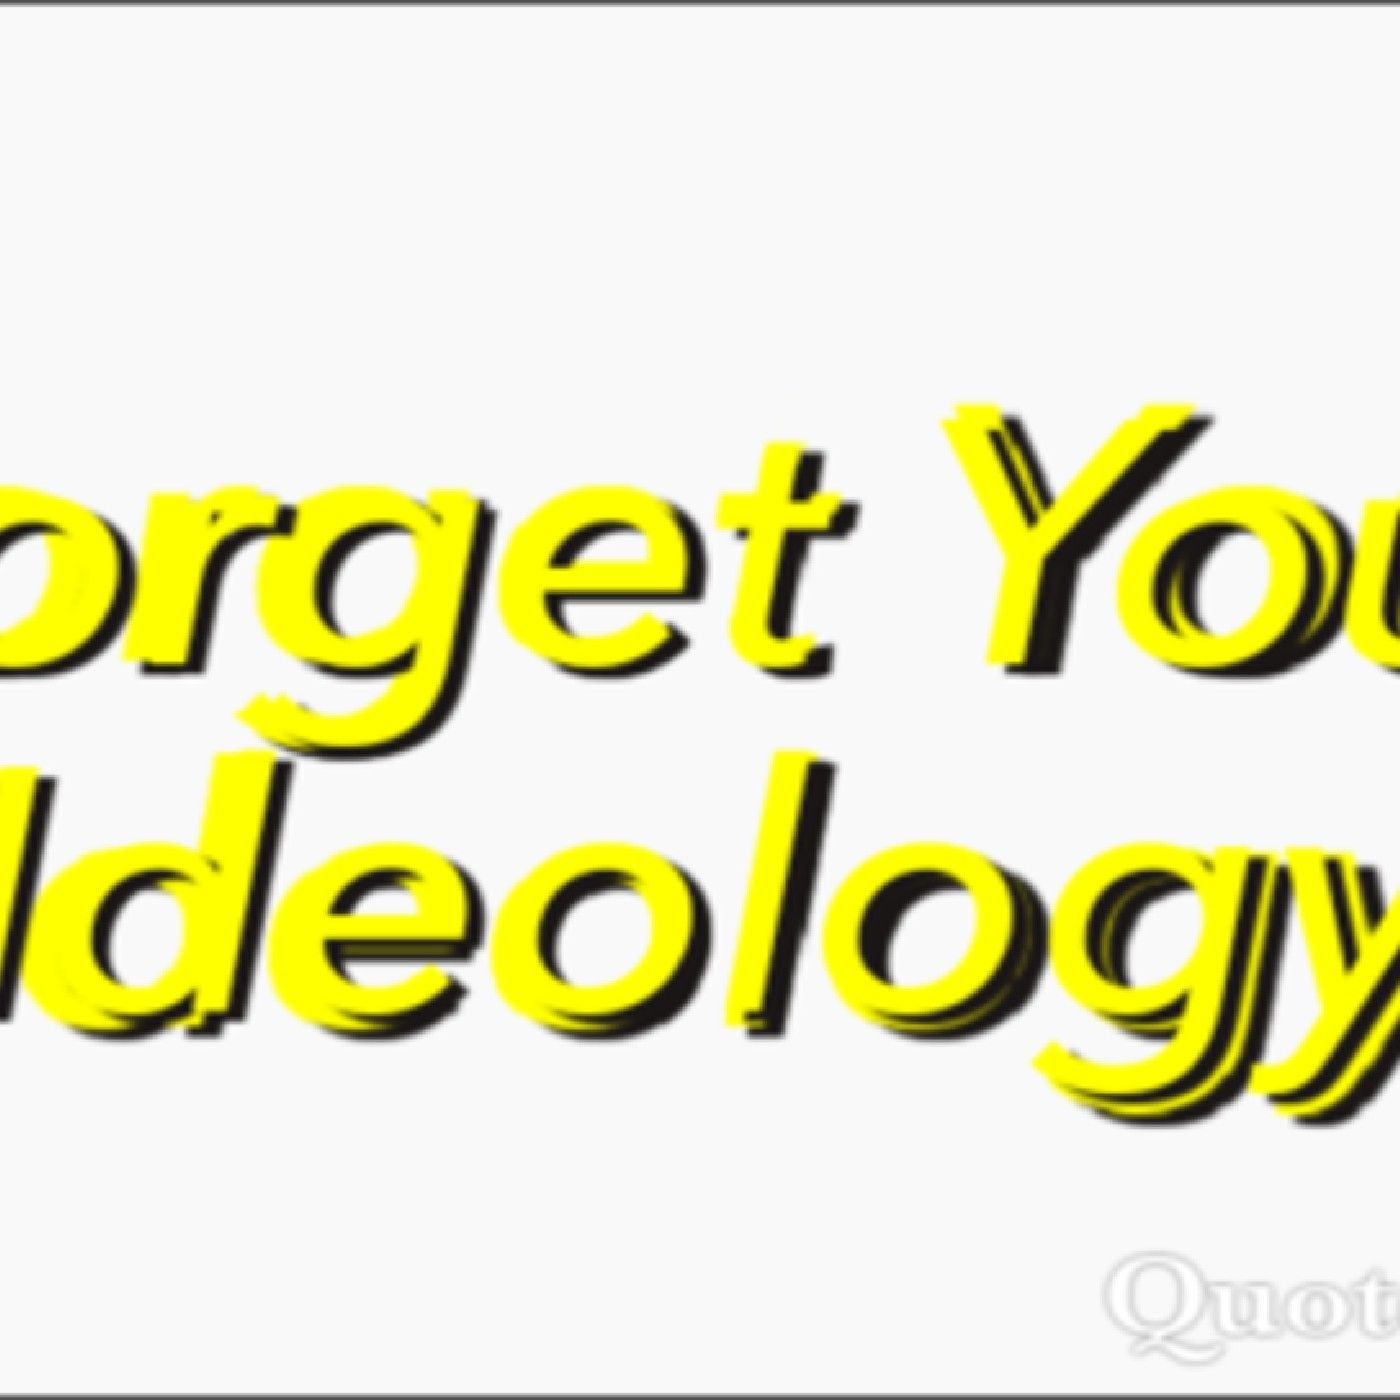 Forget Your Ideology's show